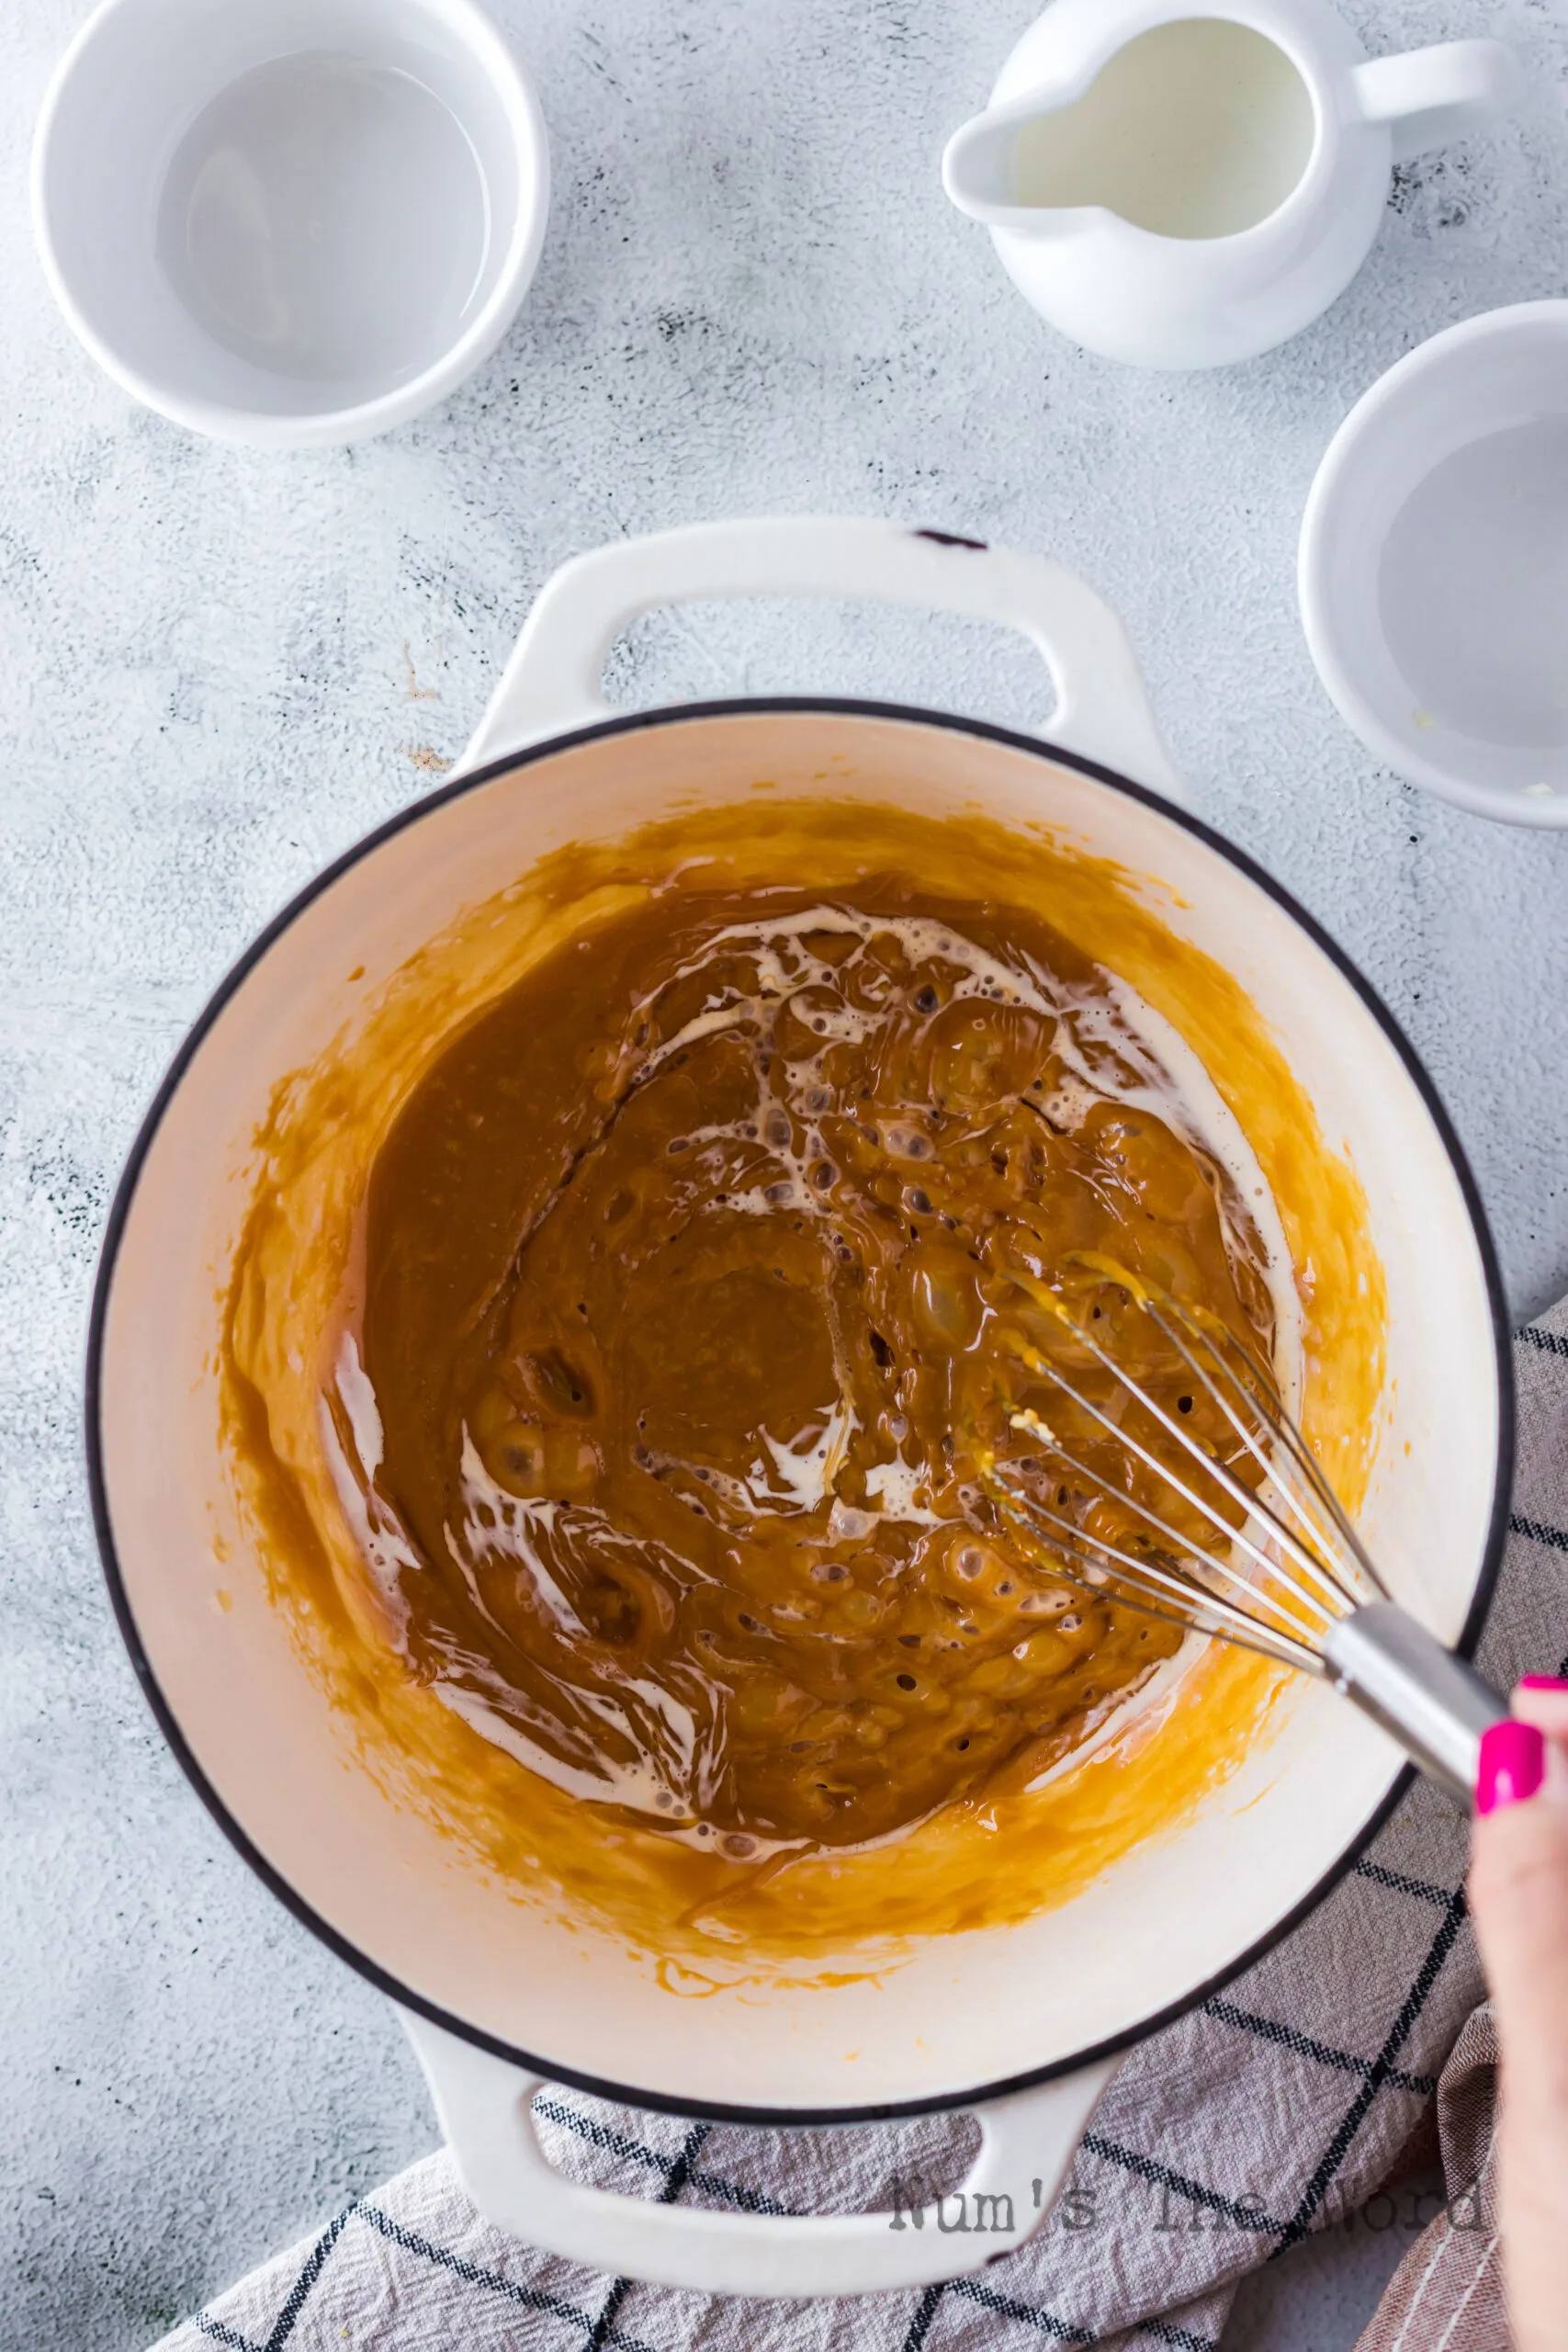 Heavy whipping cream added to caramel sauce